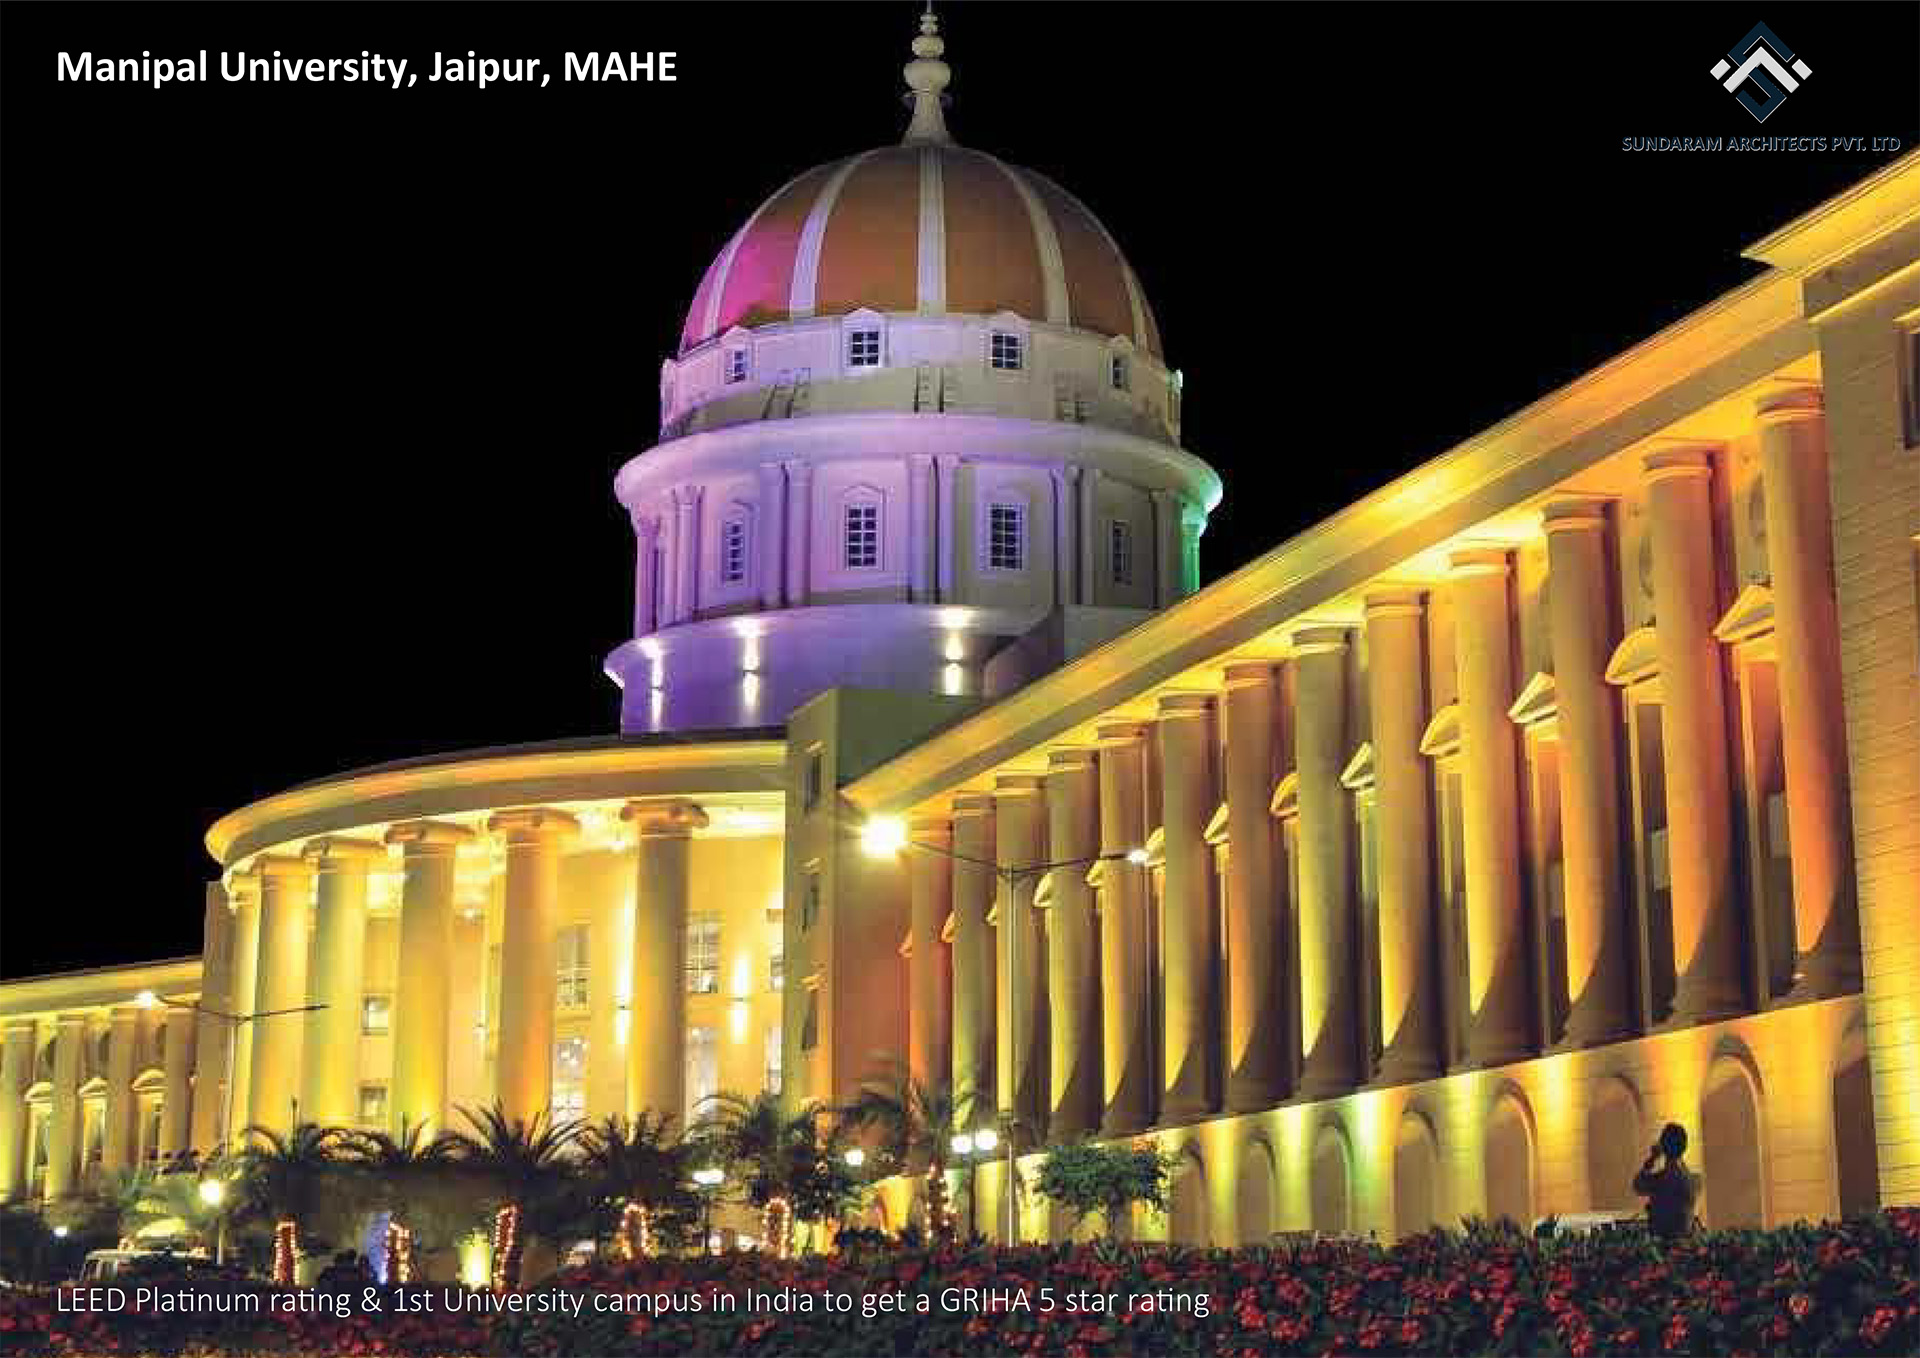 Institutional & Education of the Manipal University, Jaipur - Institutional & Education Design